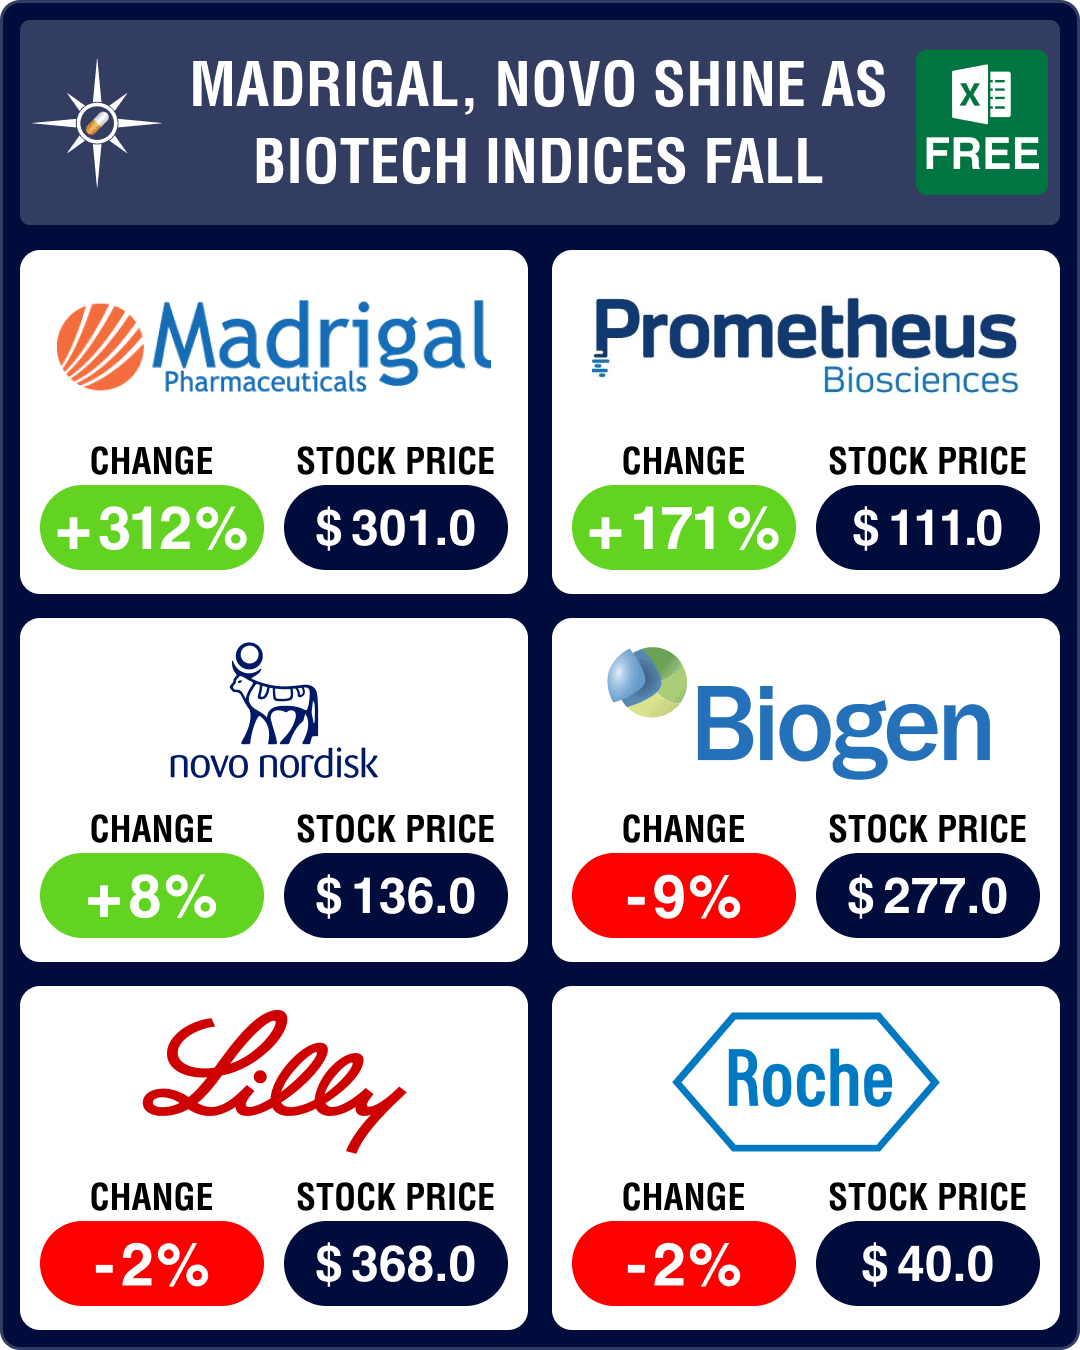 Pipeline Prospector Dec 2022: Biotech indices fall on close of a volatile year